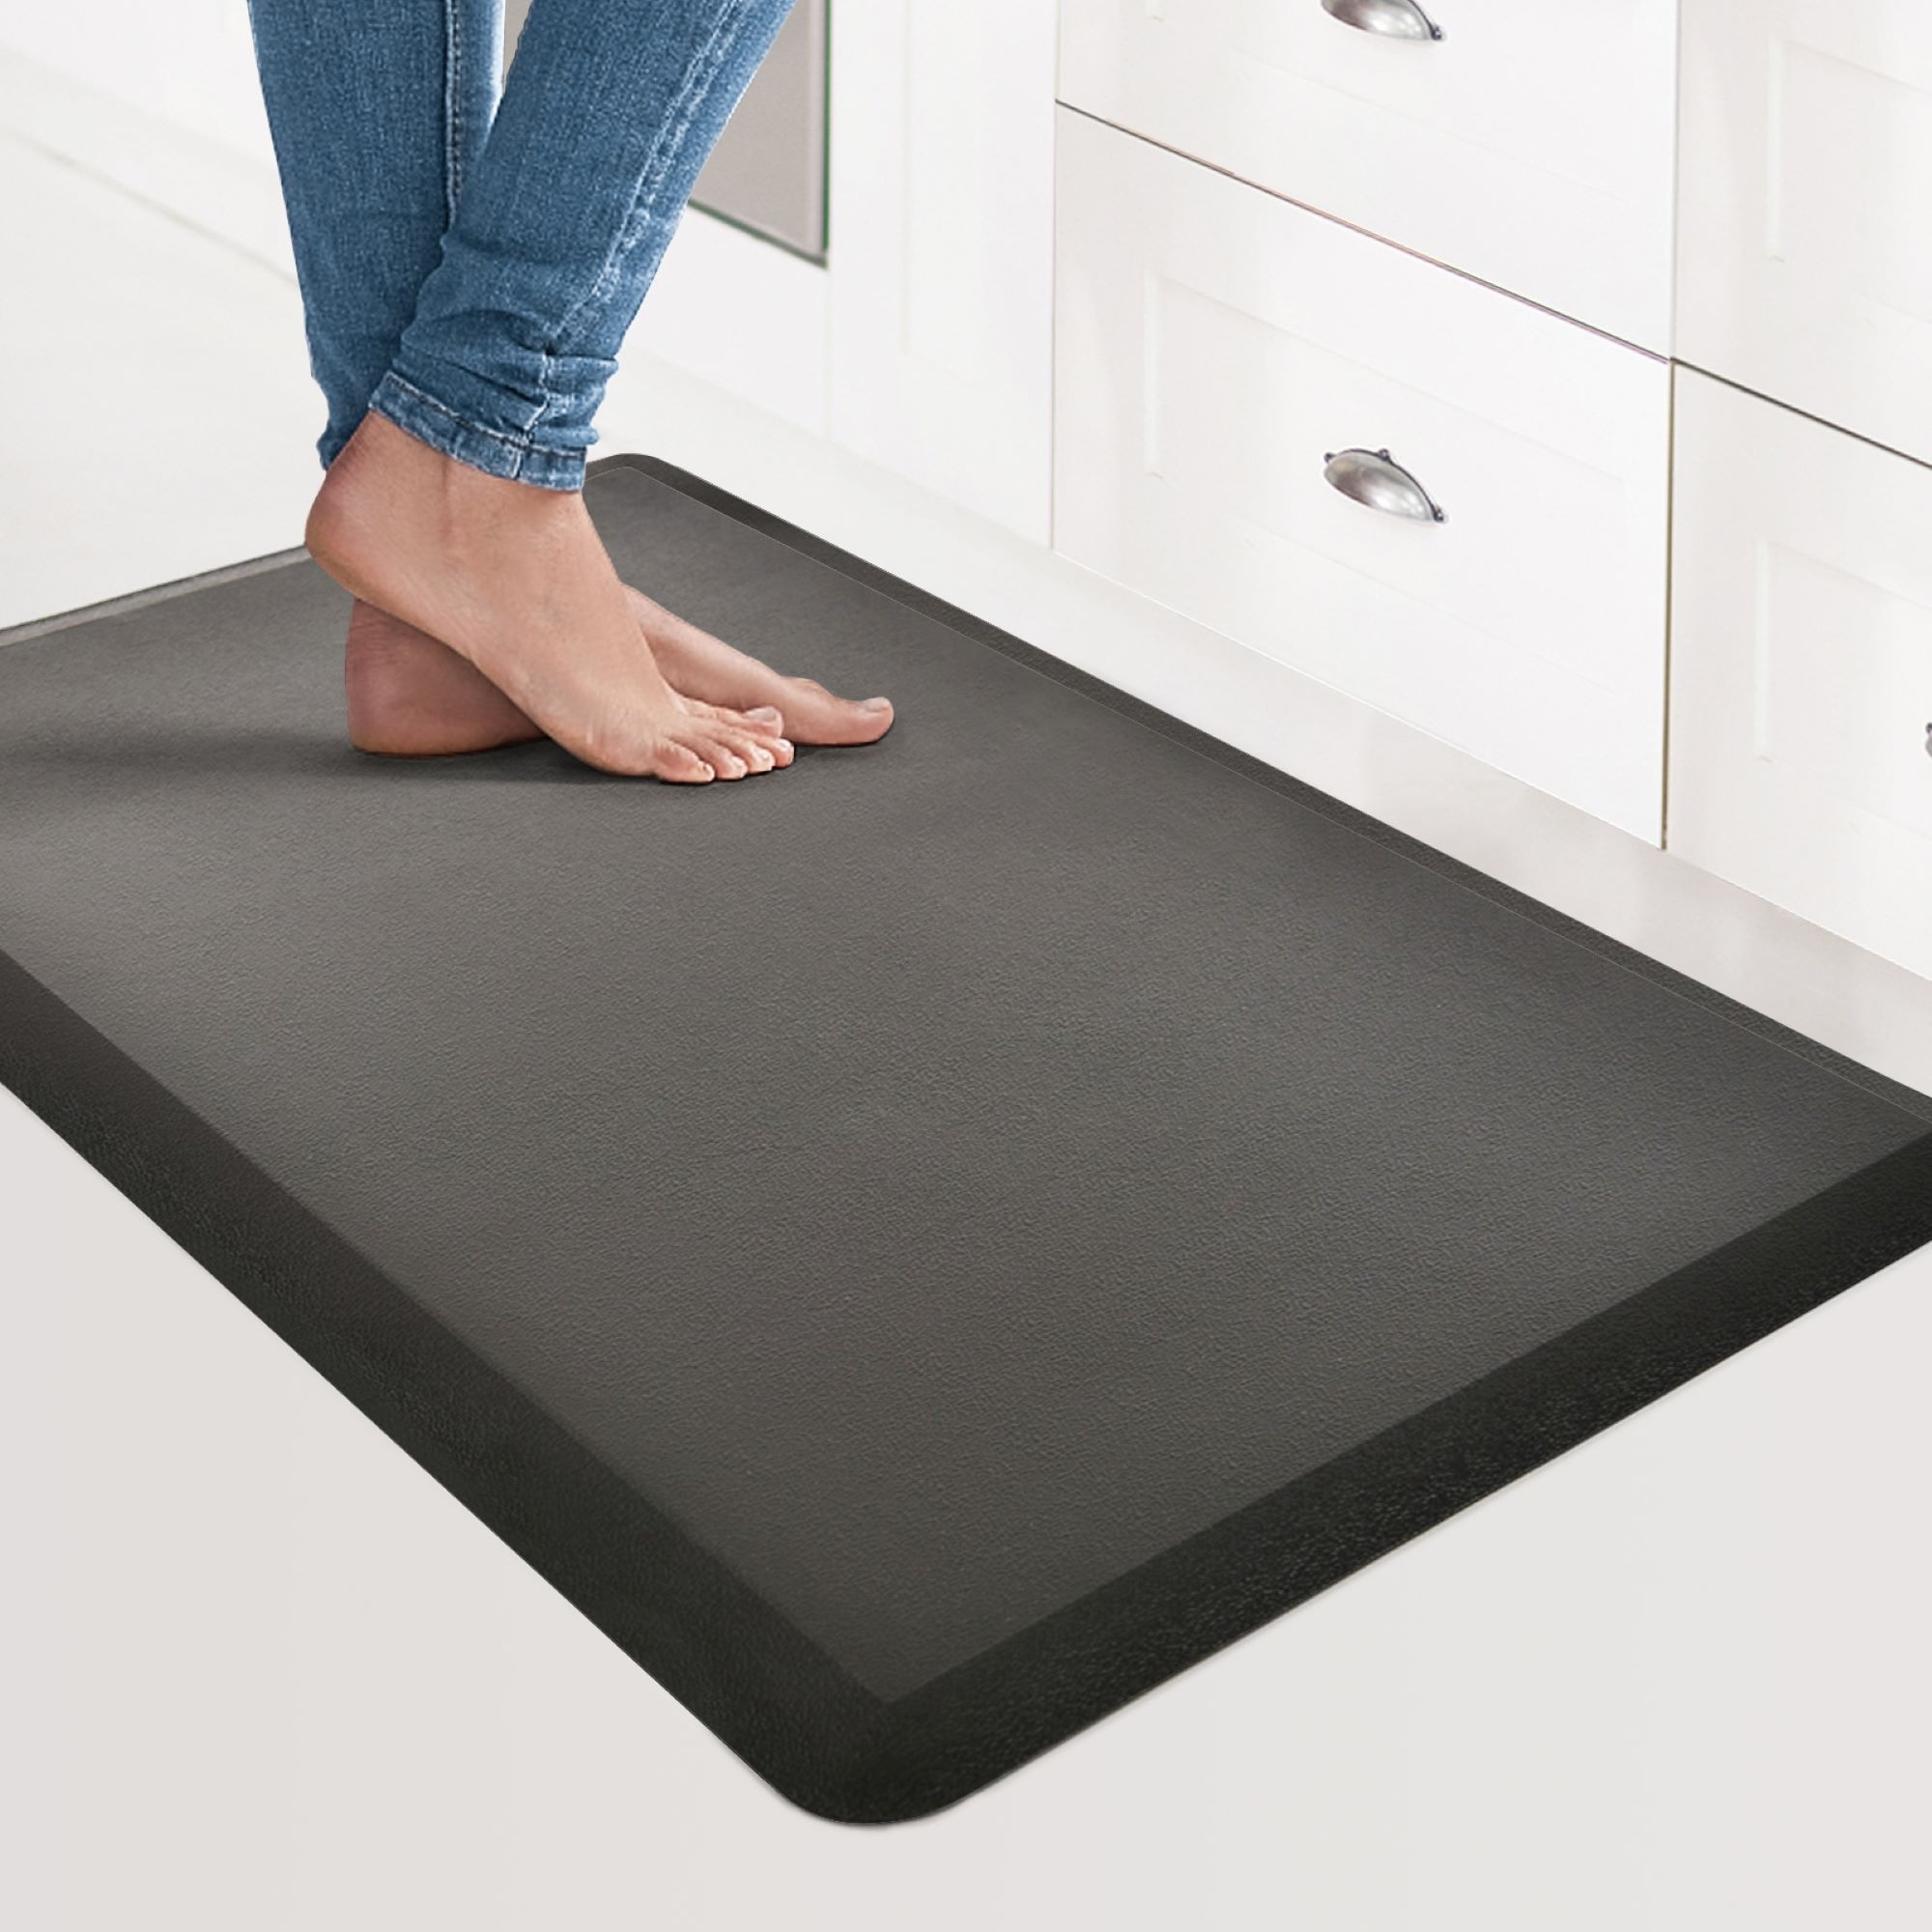 https://ak1.ostkcdn.com/images/products/is/images/direct/d1d340faaa1f48f535944d9bf45e9159dba19bf5/Premium-Anti-Fatigue-Comfort-Mat%2C-Thick%2C-Non-Slip-%26-All-Purpose-Comfort---for-Kitchen%2C-Office-Standing-Desk.jpg